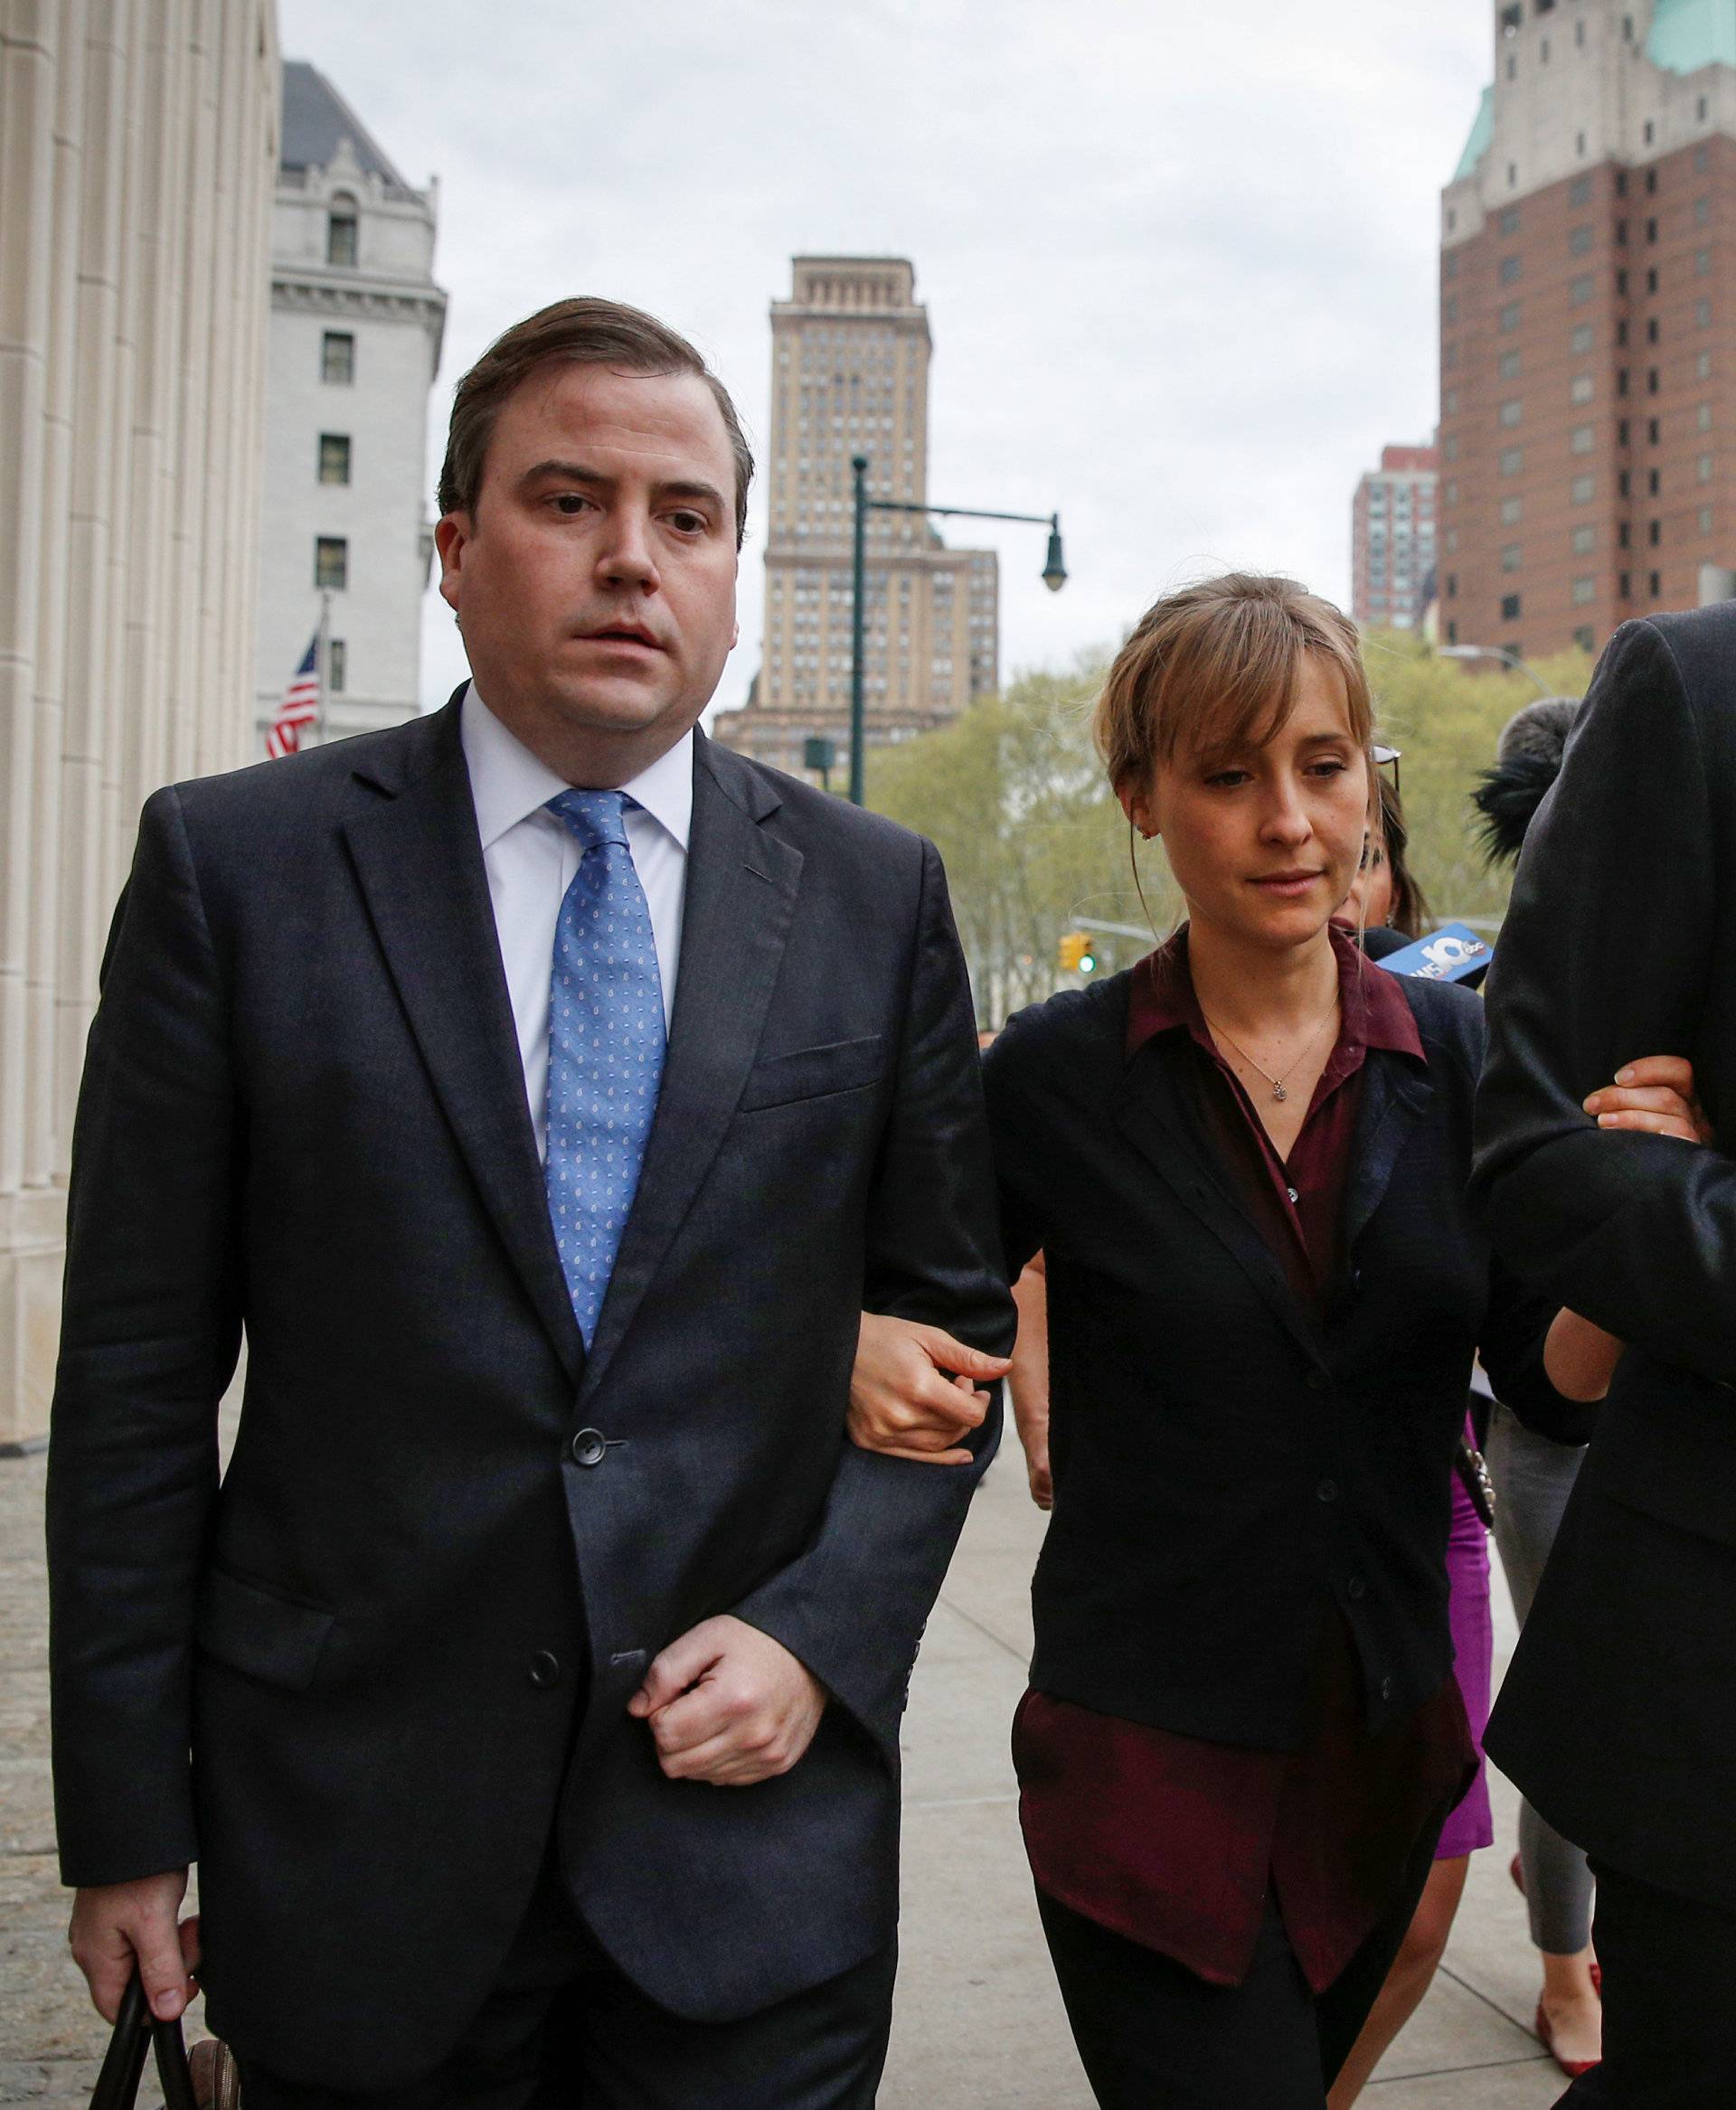 Actor Allison Mack, arrives for a hearing on charges of sex trafficking in relation to the Albany-based organization Nxivm at United States Federal Courthouse in Brooklyn, New York